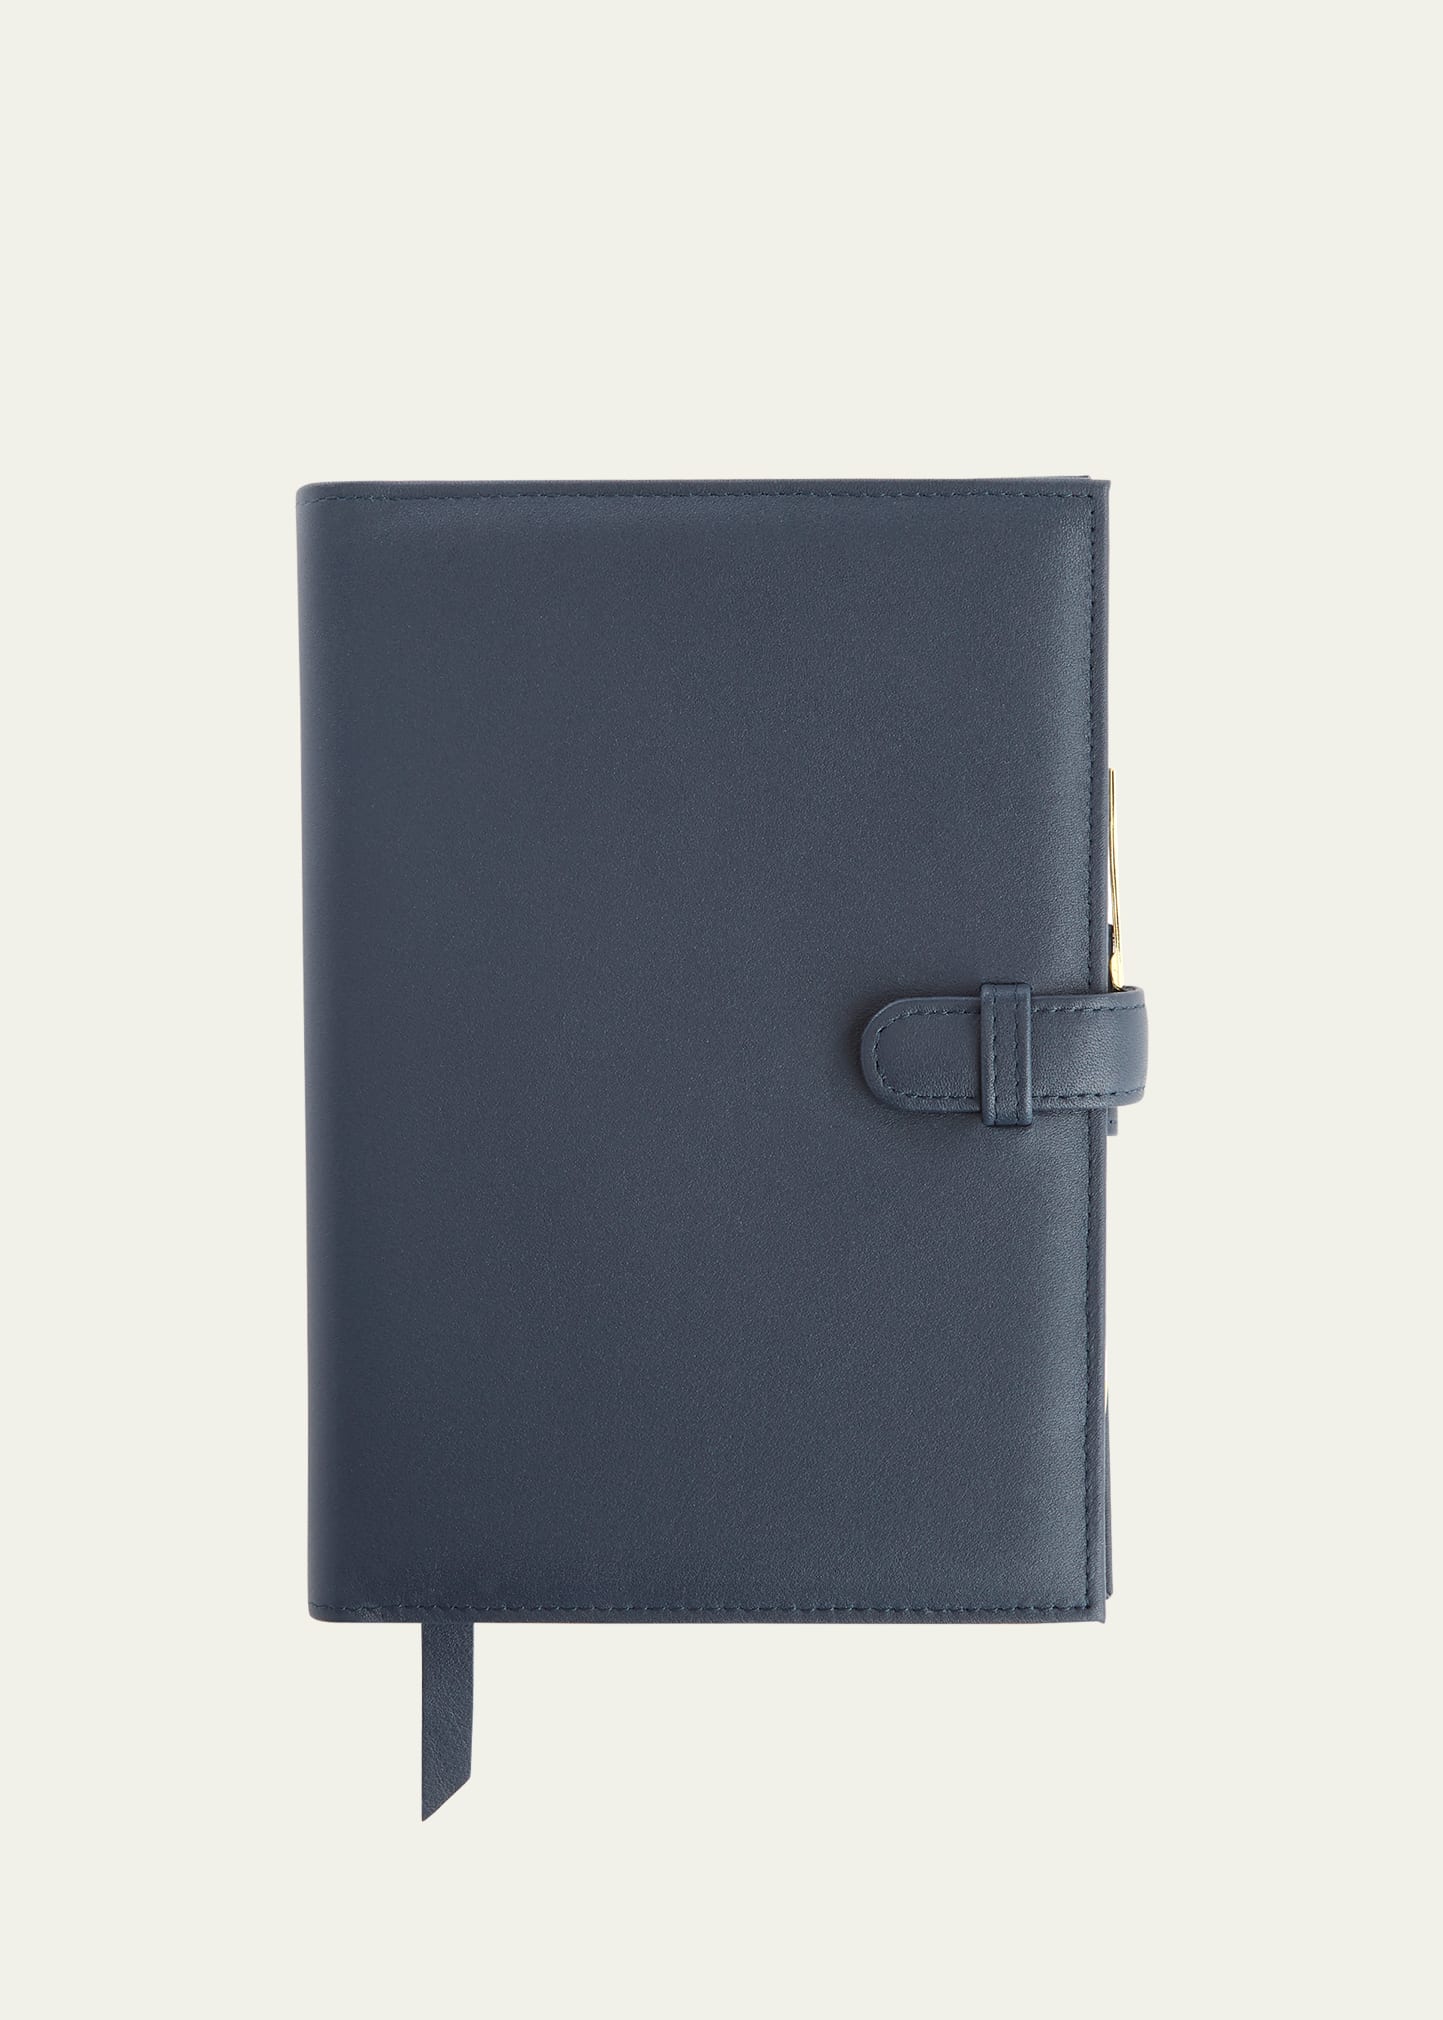 Personalized Executive Leather Daily Planner